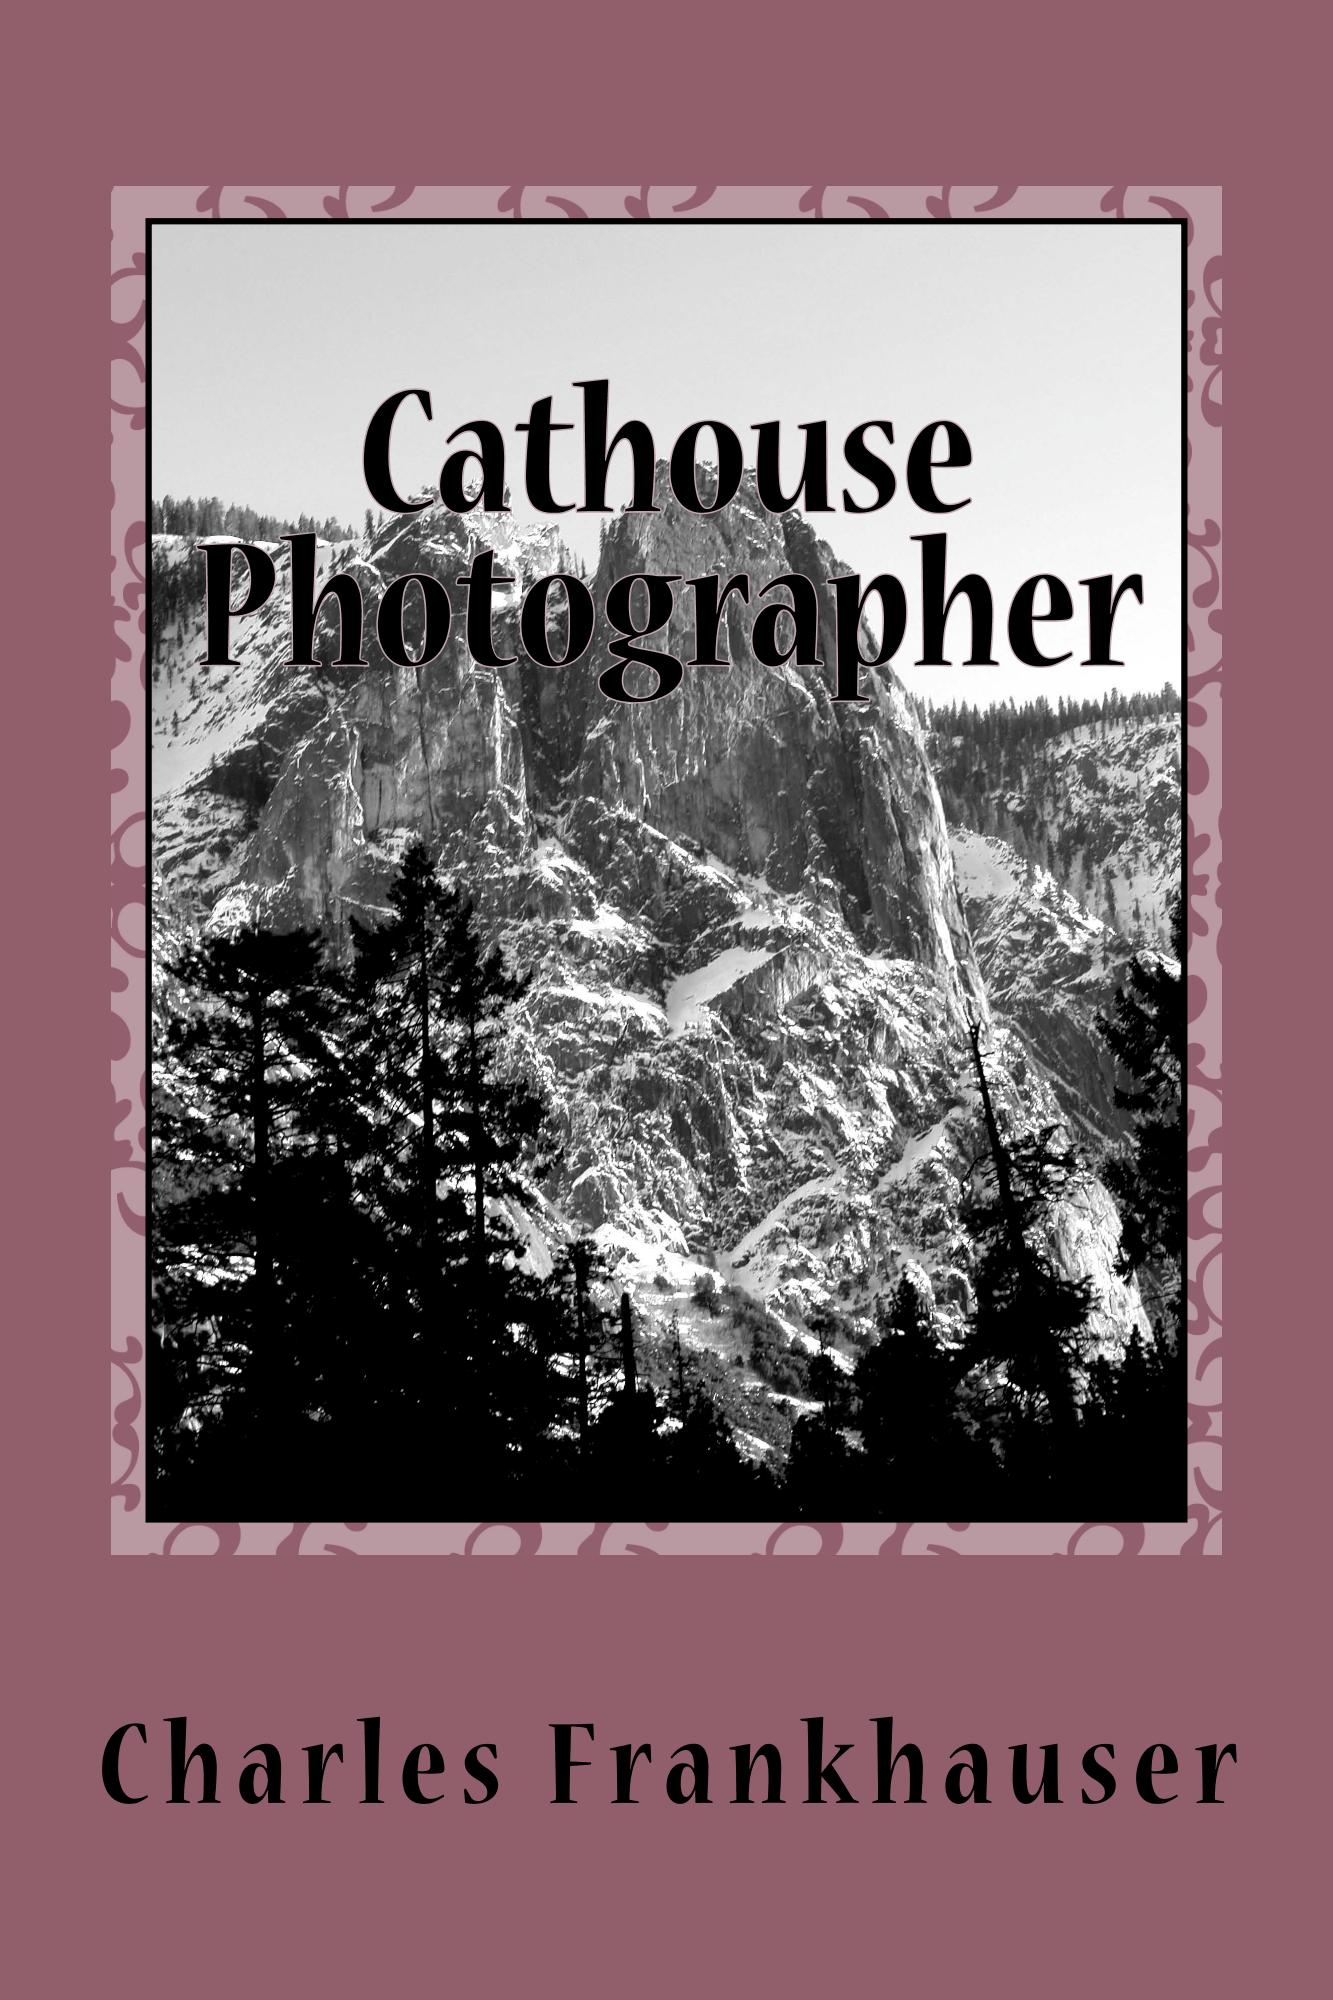 FREE: Cathouse Photographer by Charles Frankhauser